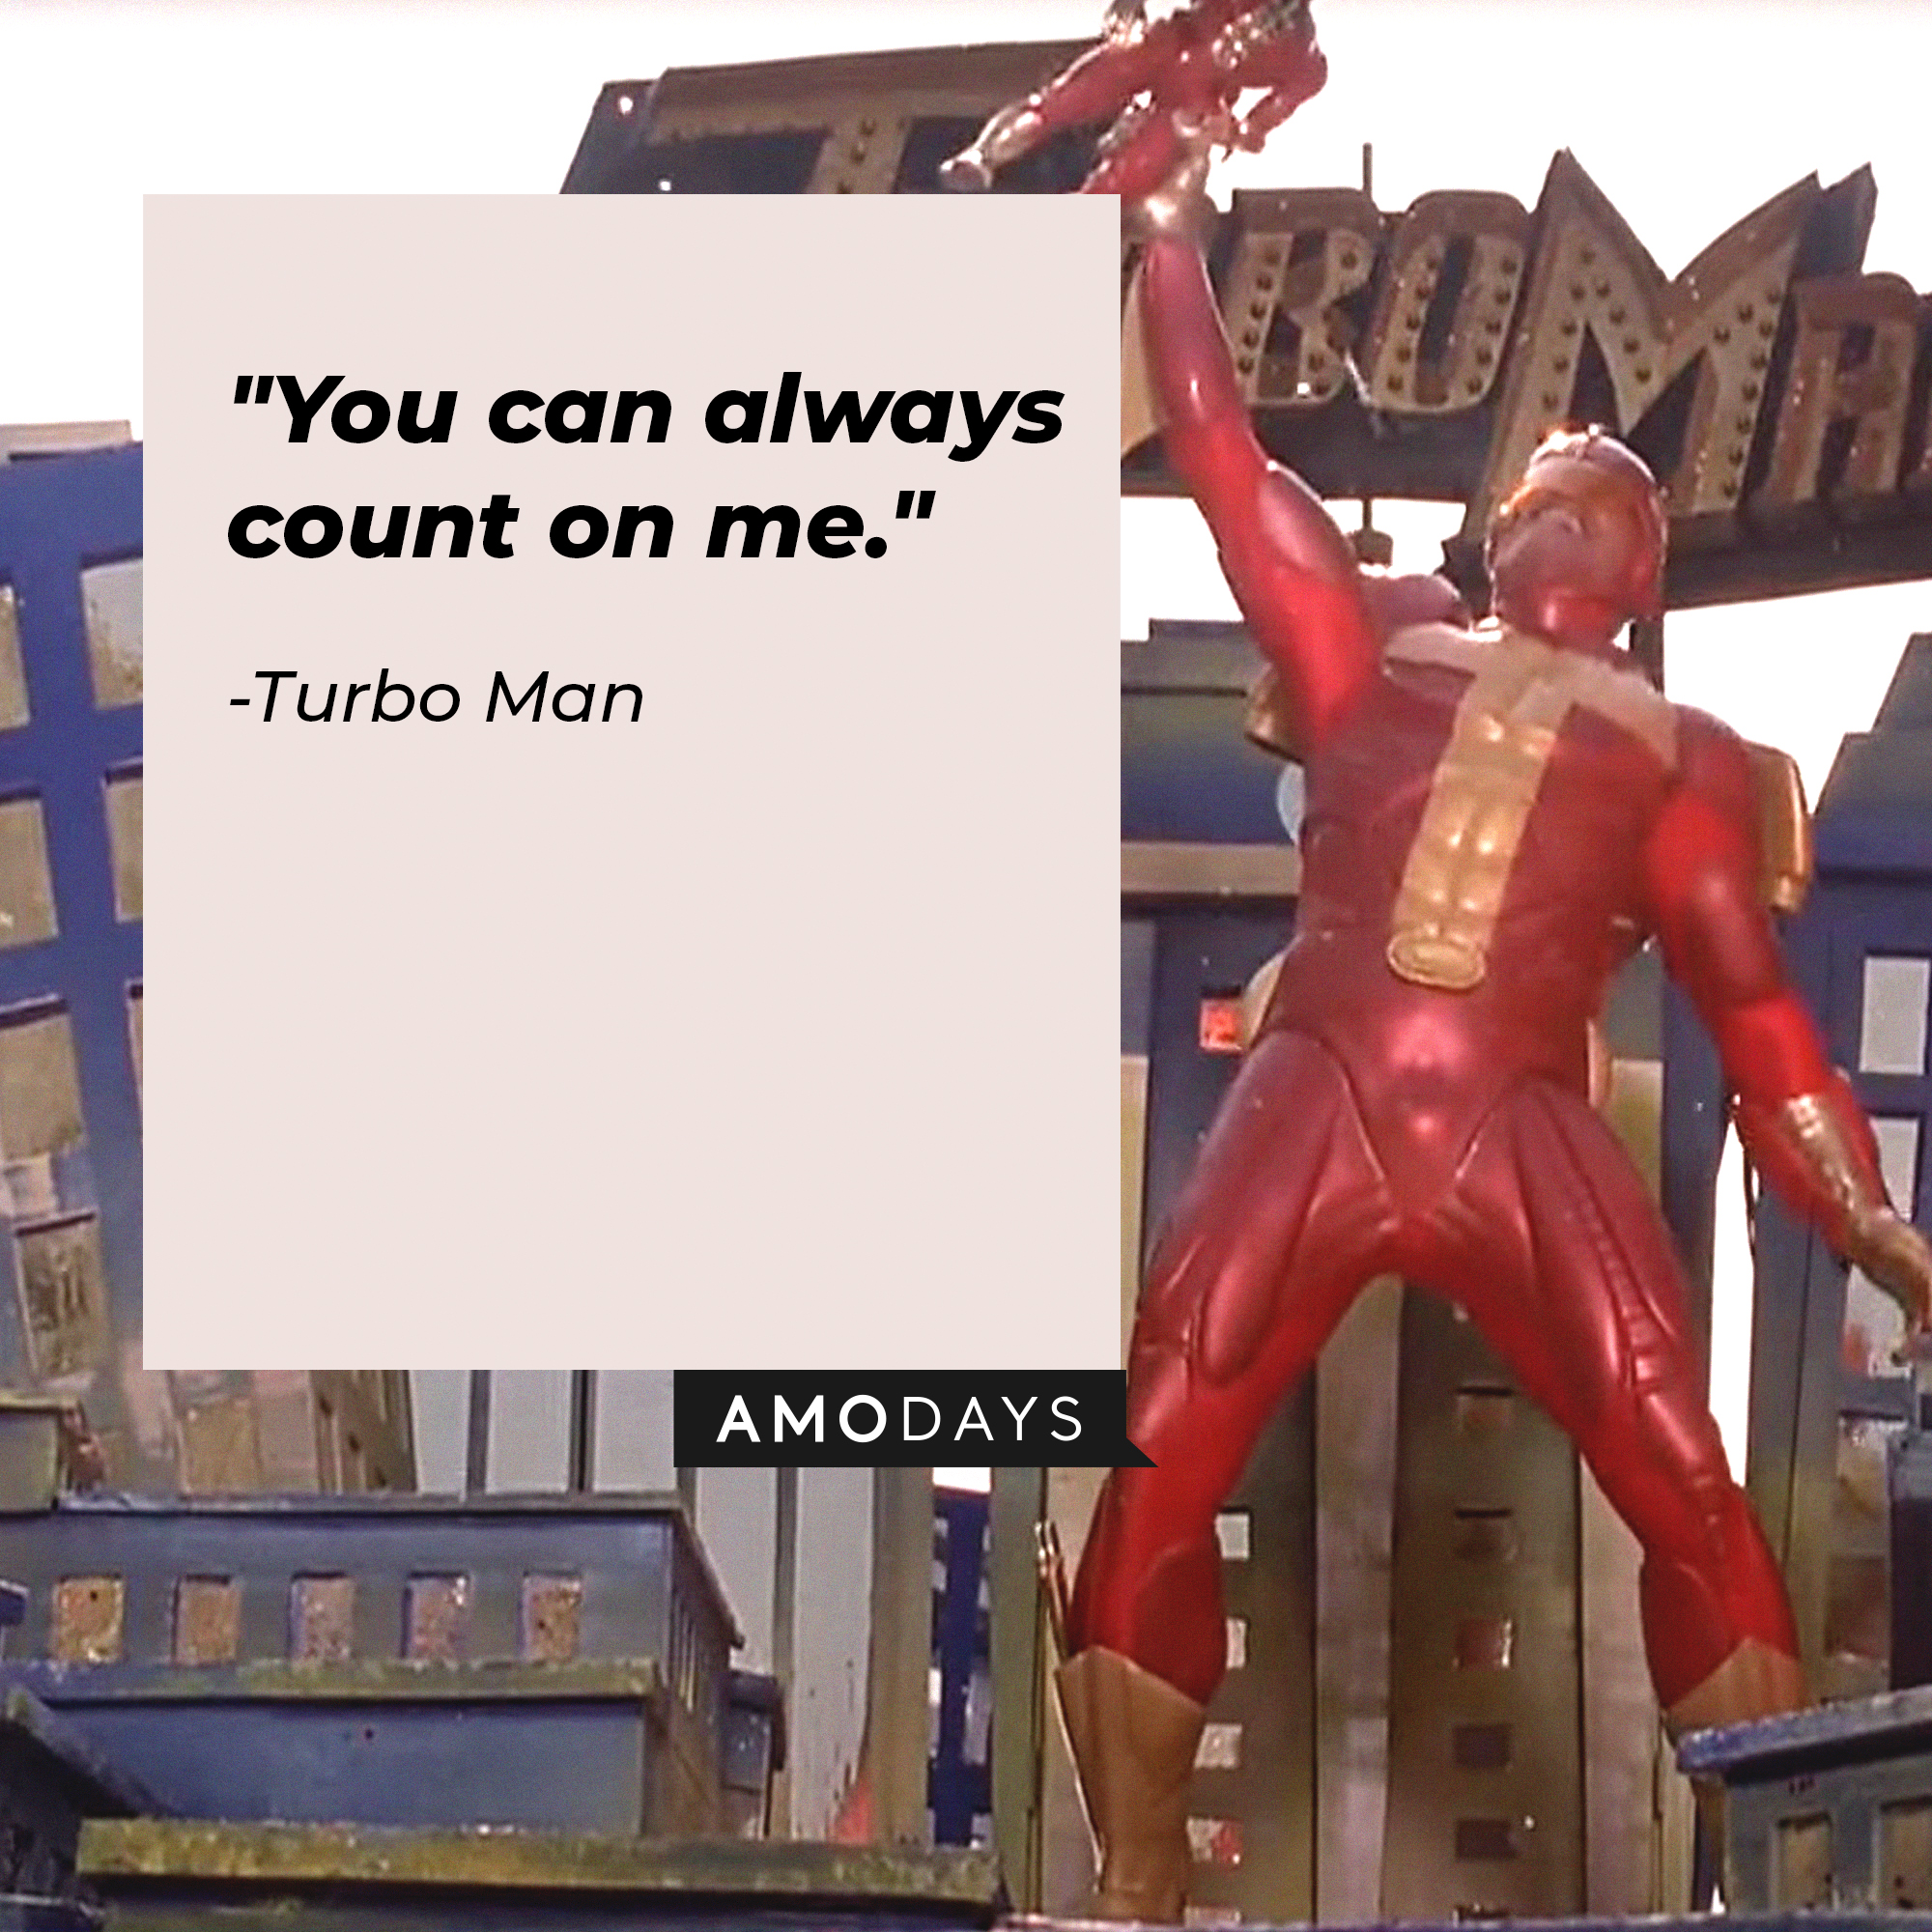 Turbo Man's quote: "You can always count on me." | Source: Facebook.com/JingleAllTheWayMovies